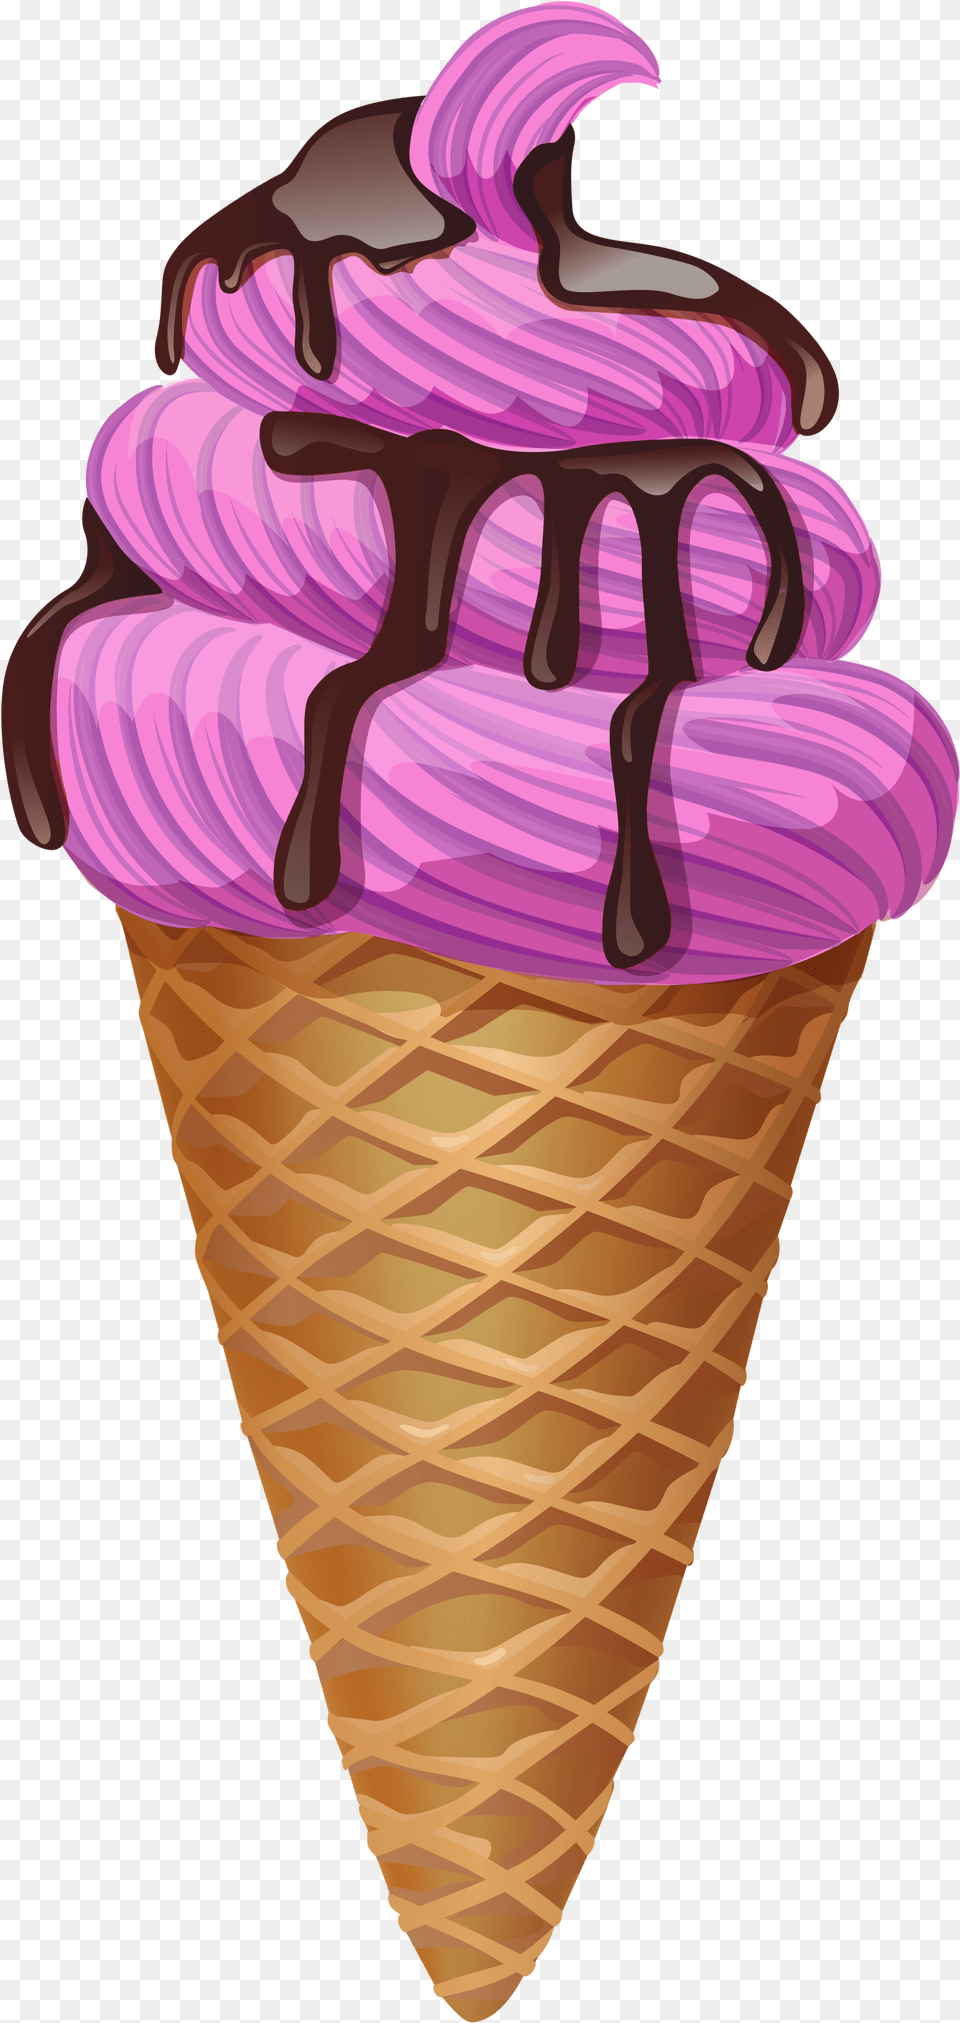 Ice Cream Cone Background Clipart Collection Clip Art Ice Cream, Dessert, Food, Ice Cream, Person Png